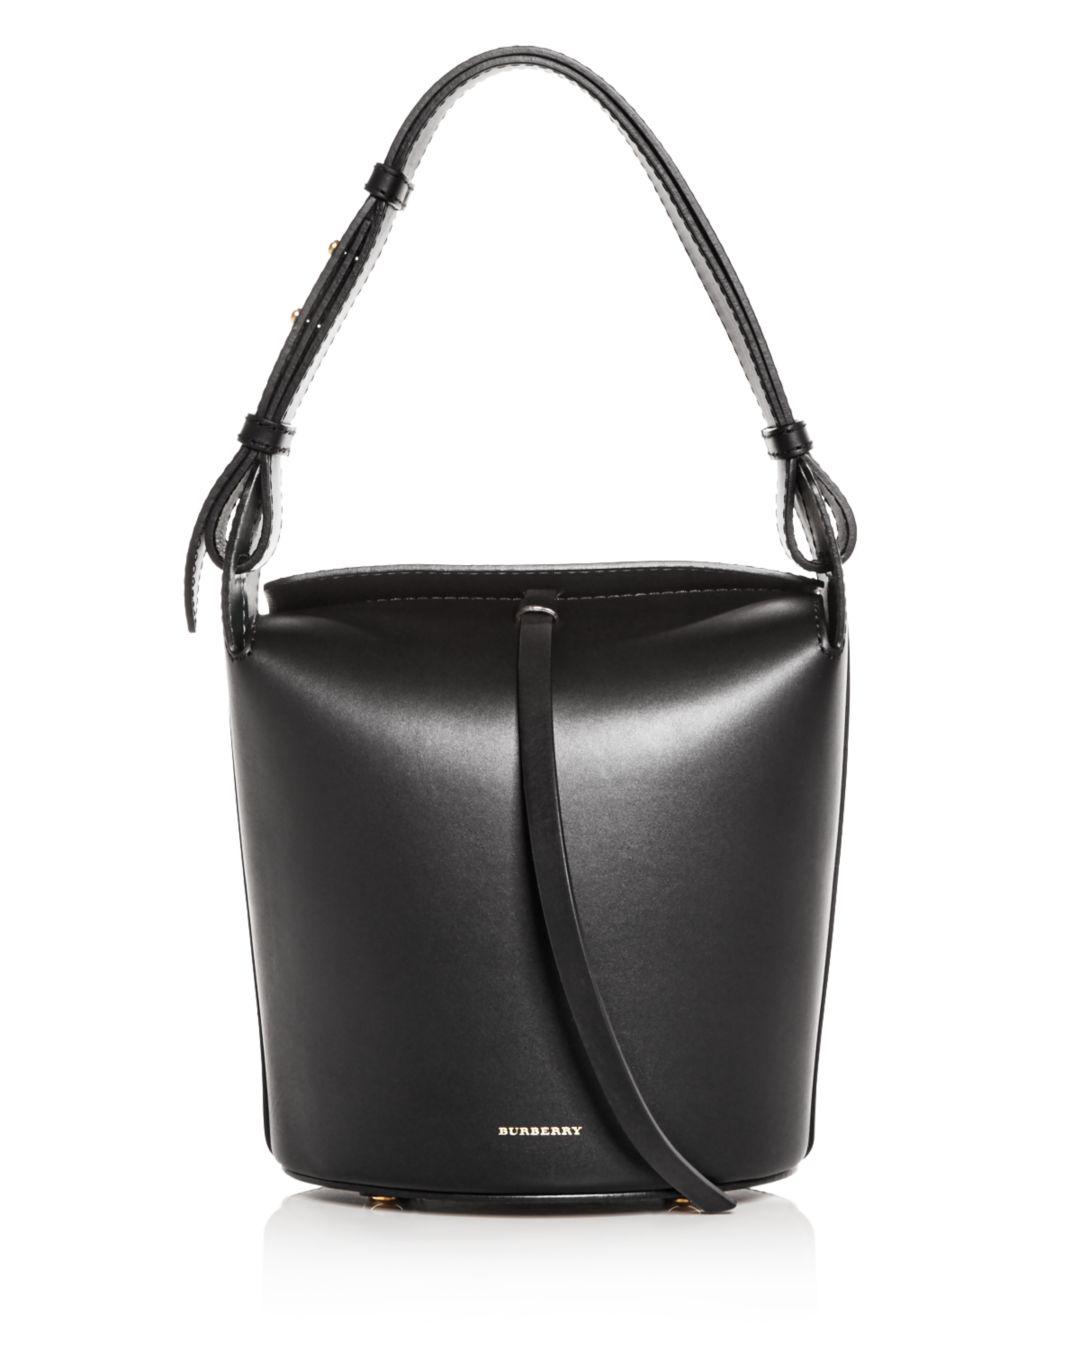 Burberry The Small Leather Bucket Bag in Black | Lyst